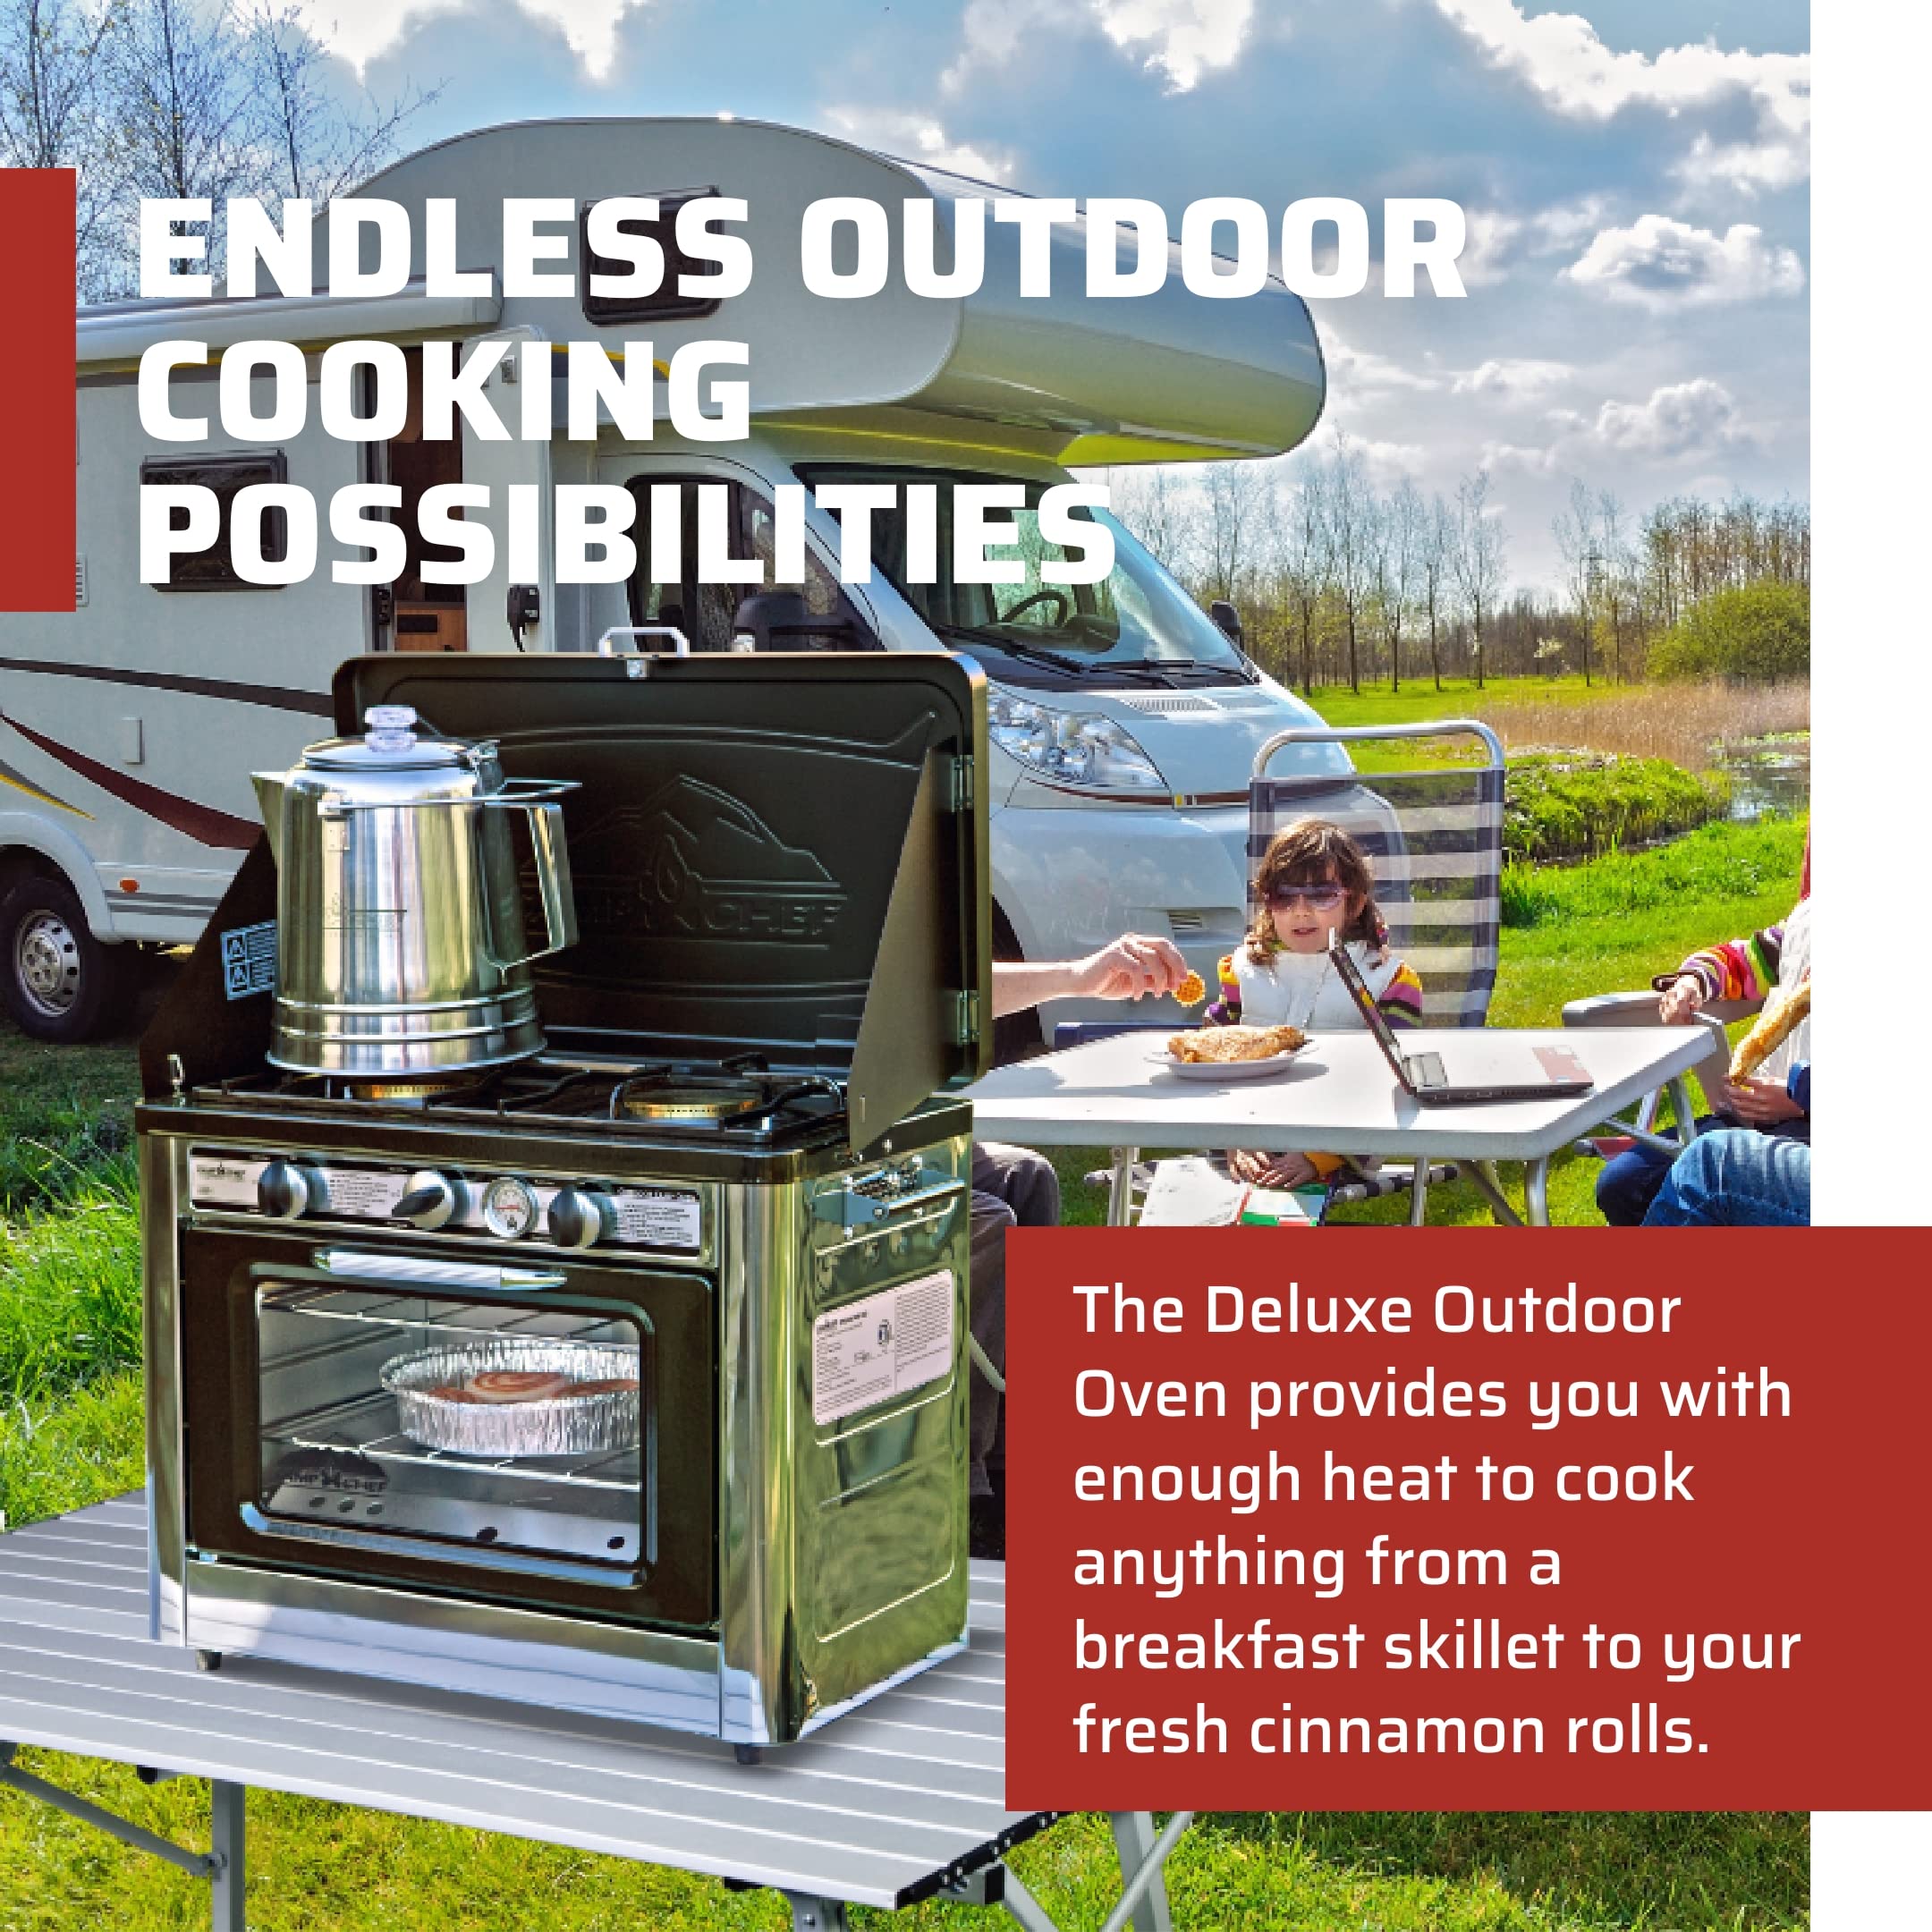 Camp Chef Outdoor Camp Oven, Dimensions with handles: 15 in. L x 25 in. W x 18 in. H